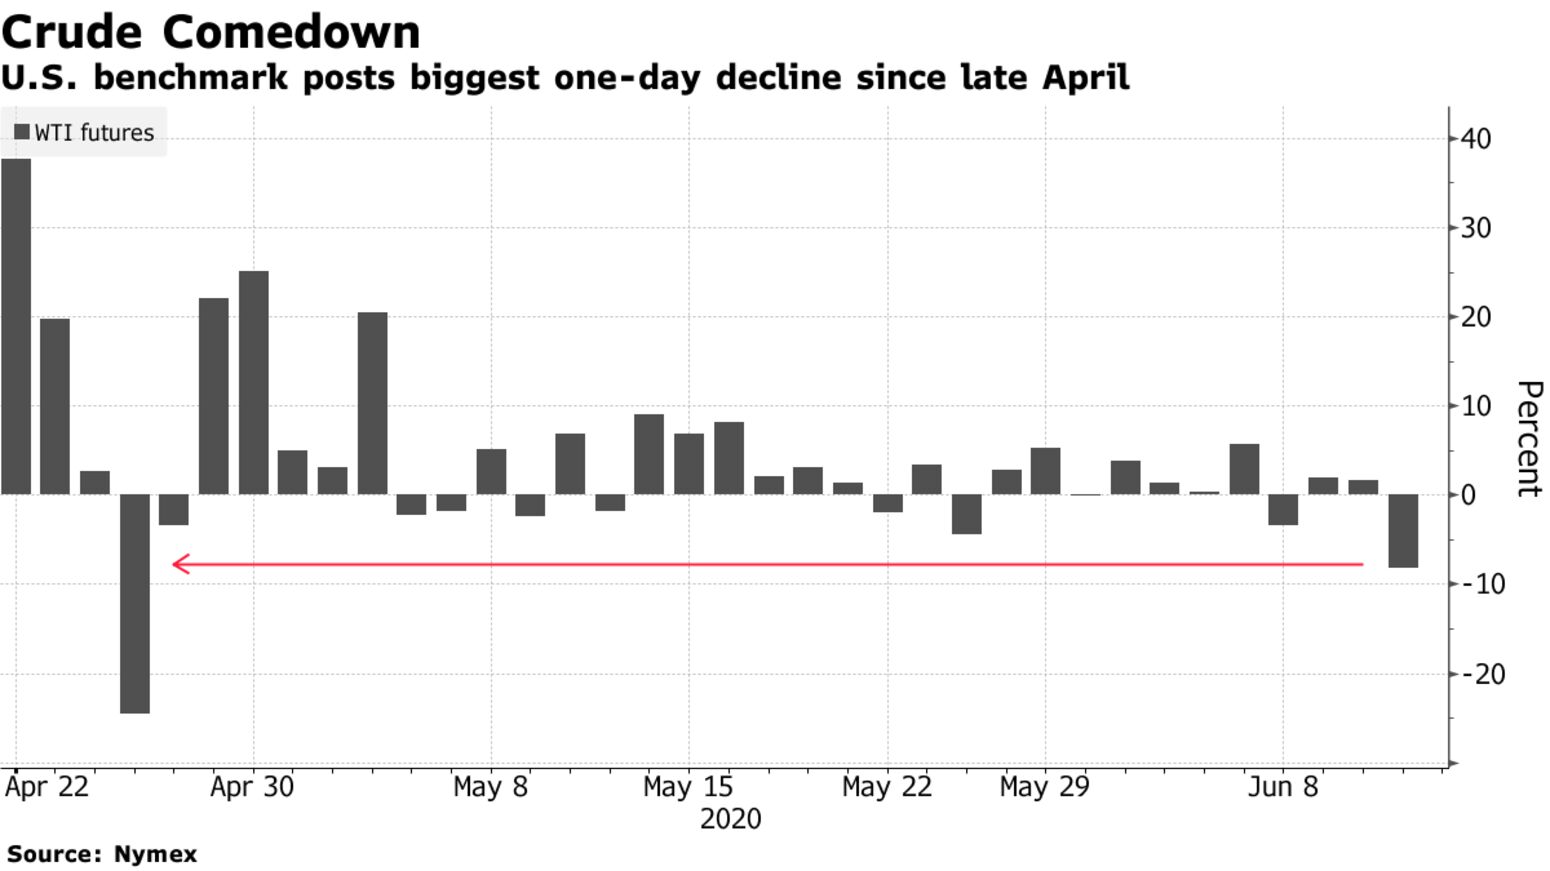 U.S. benchmark posts biggest one-day decline since late April